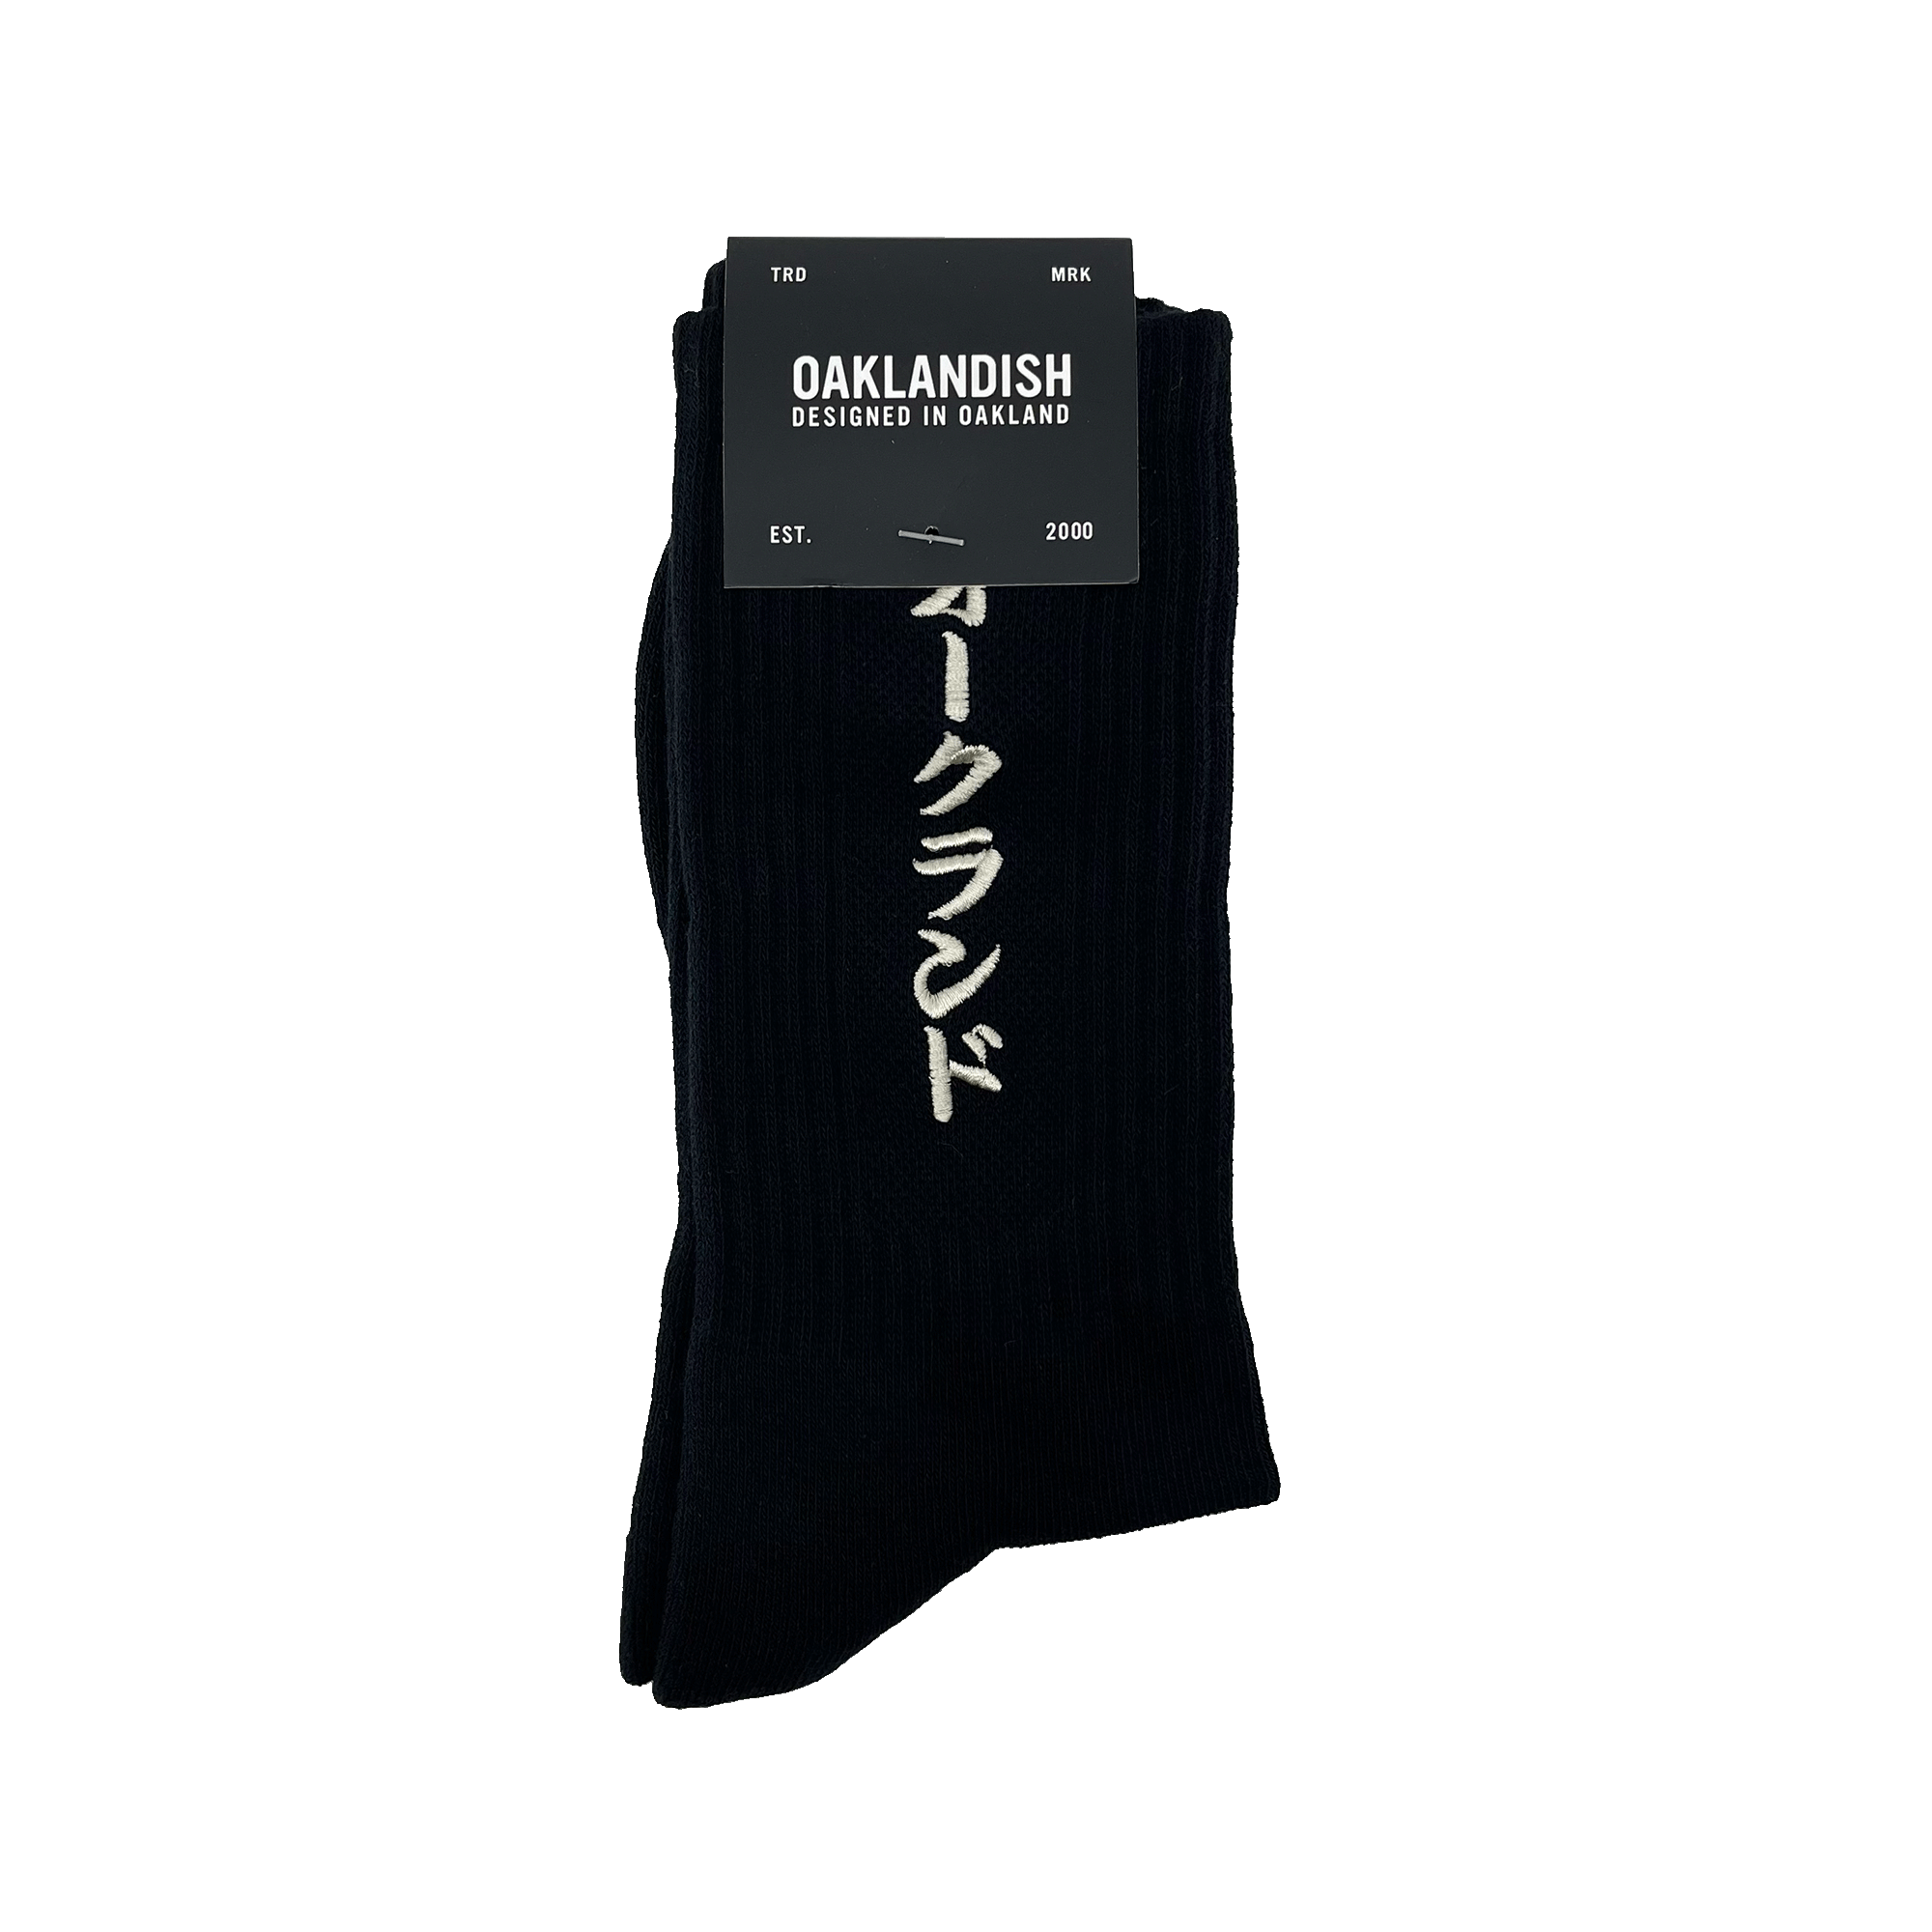 Pair folded black crew socks in Oaklandish packaging with a white embroidered Kanji Japanese script wordmark on the sock.